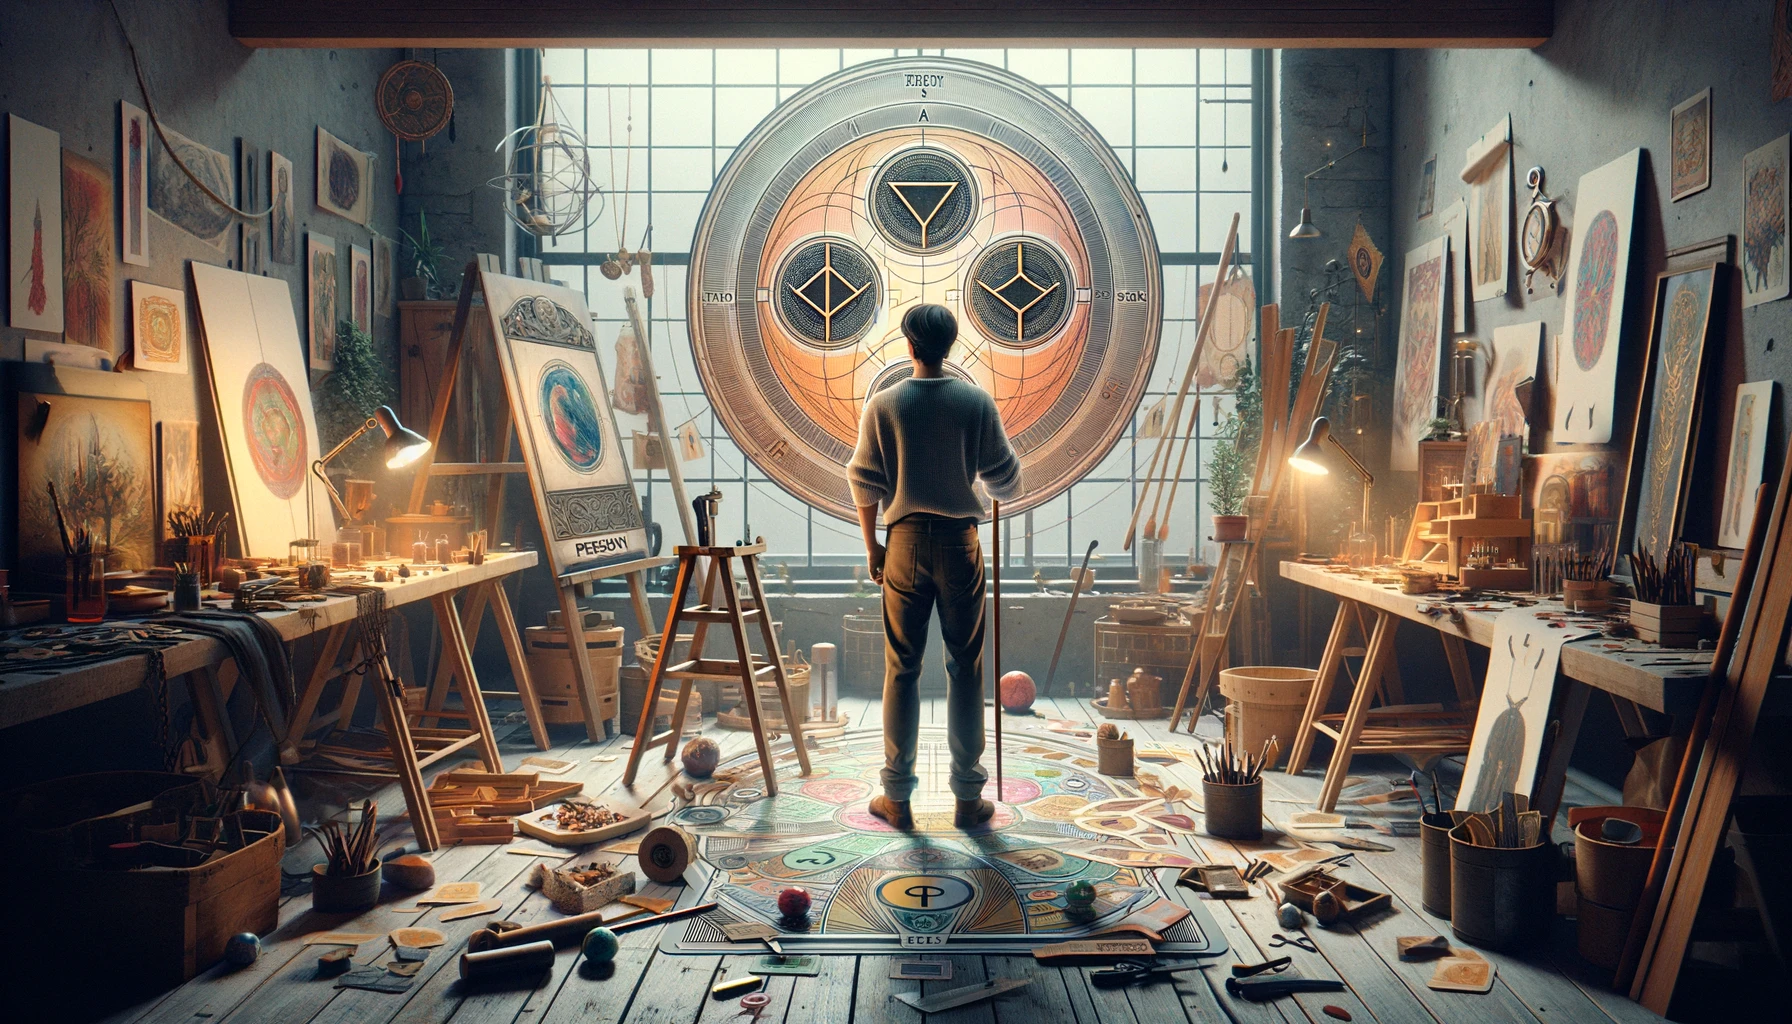 An illustration showing an individual at the center of a creative and collaborative effort, surrounded by symbols of craftsmanship, teamwork, and achievement. The scene embodies the essence of the Three of Pentacles, highlighting dedication, skill, and the ability to combine practical efforts with artistic vision towards the realization of collective goals.